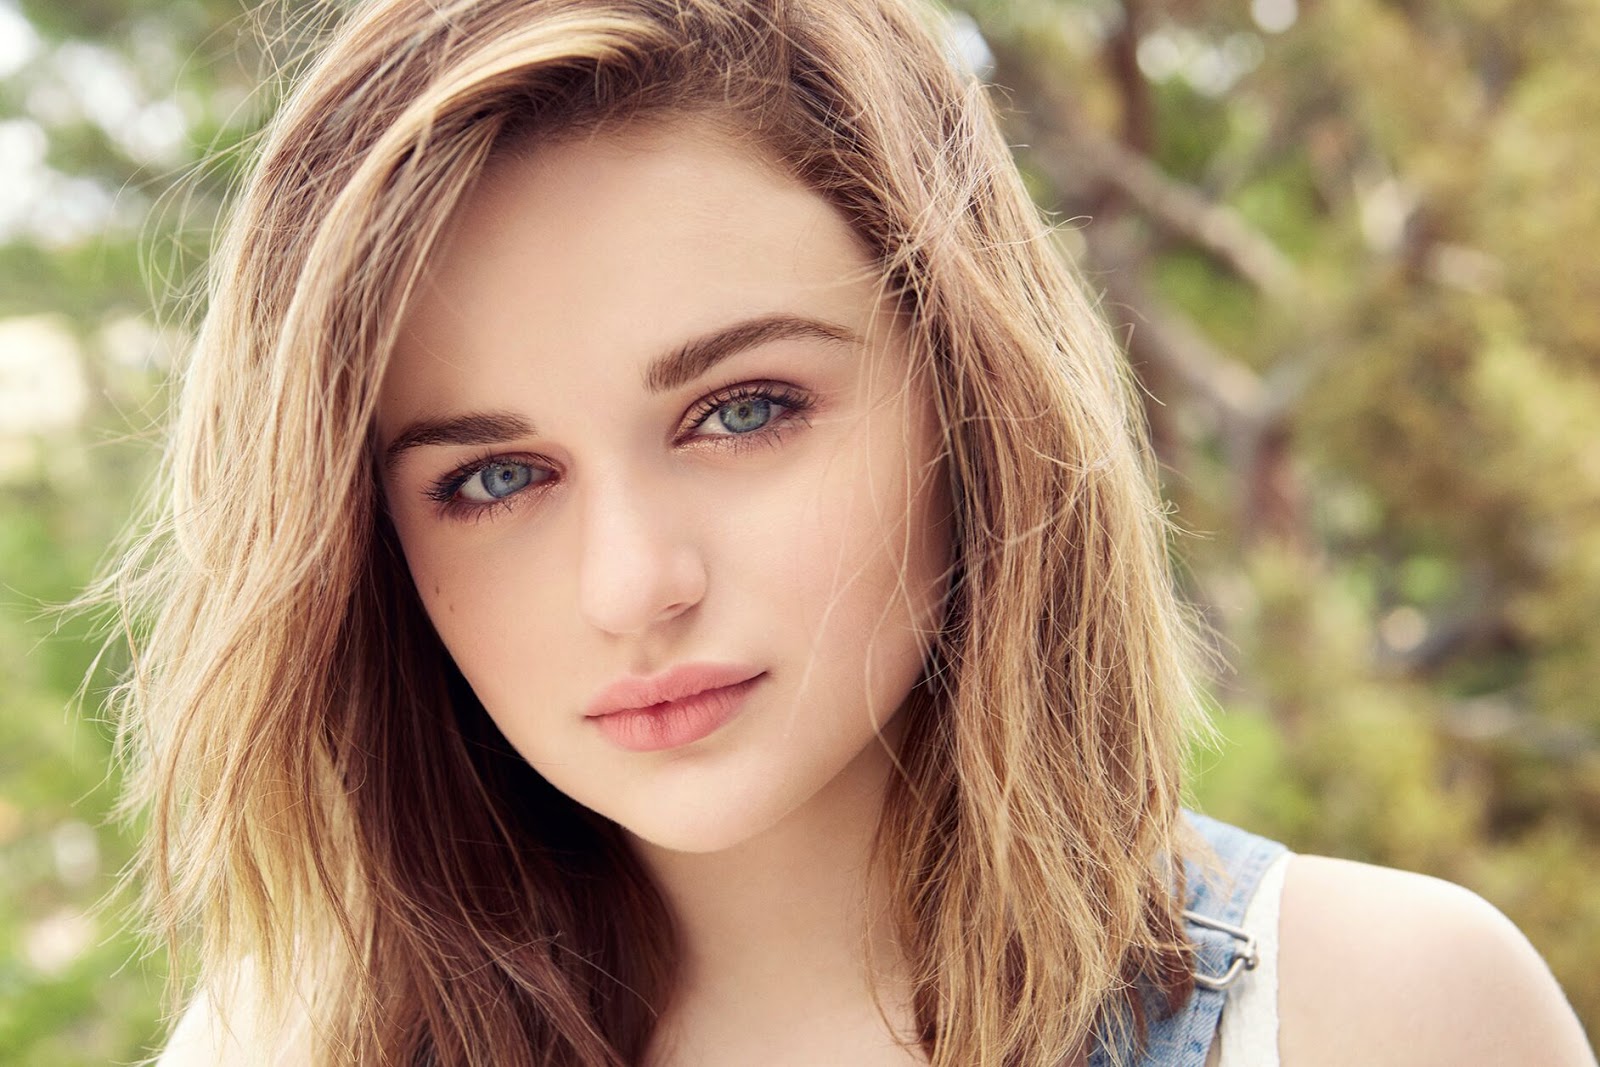 Joey King Poster Wallpapers